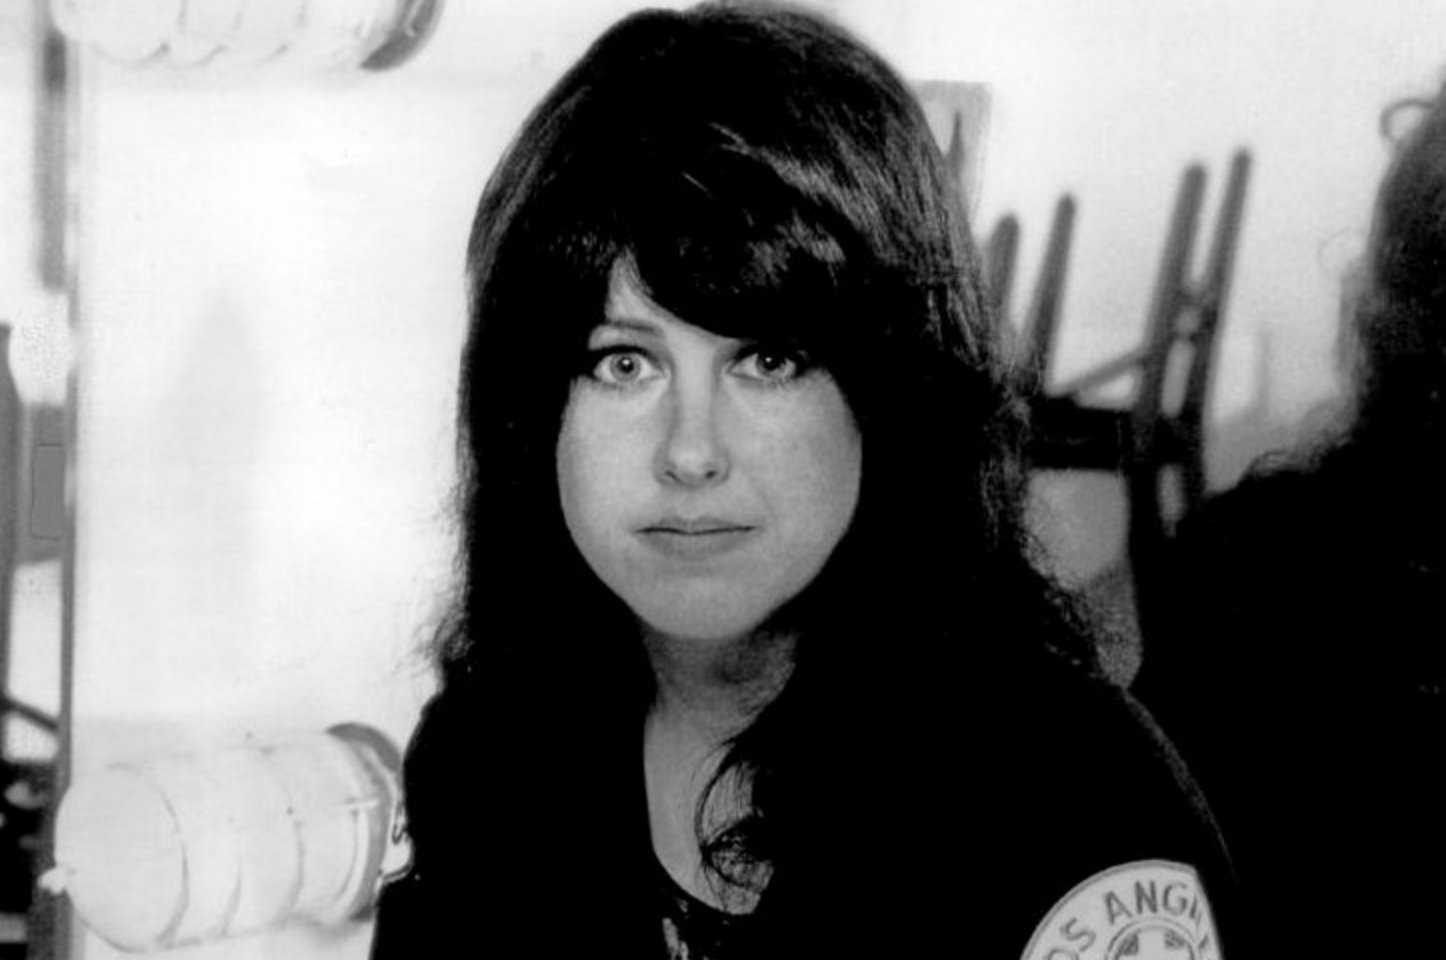 Happy Birthday to singer, songwriter and artist Grace Slick born on October 30, 1939 